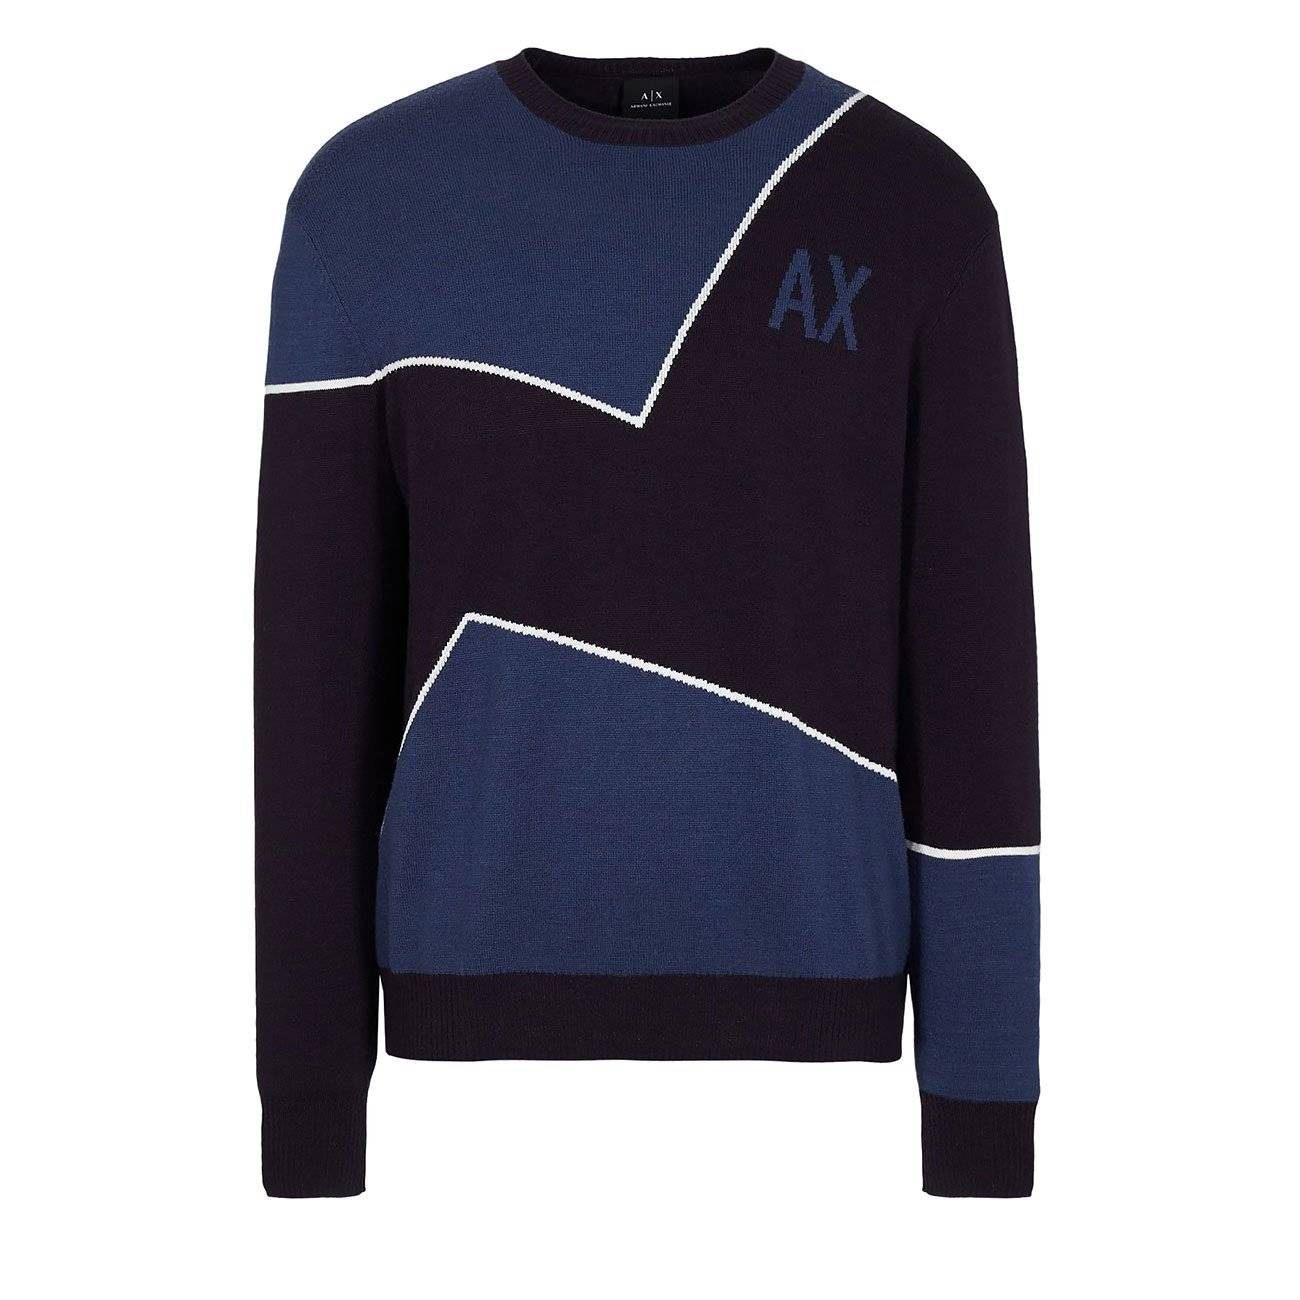 TWO-TONED PULLOVER WITH LOGO AND CONTRAST DETAILS XL